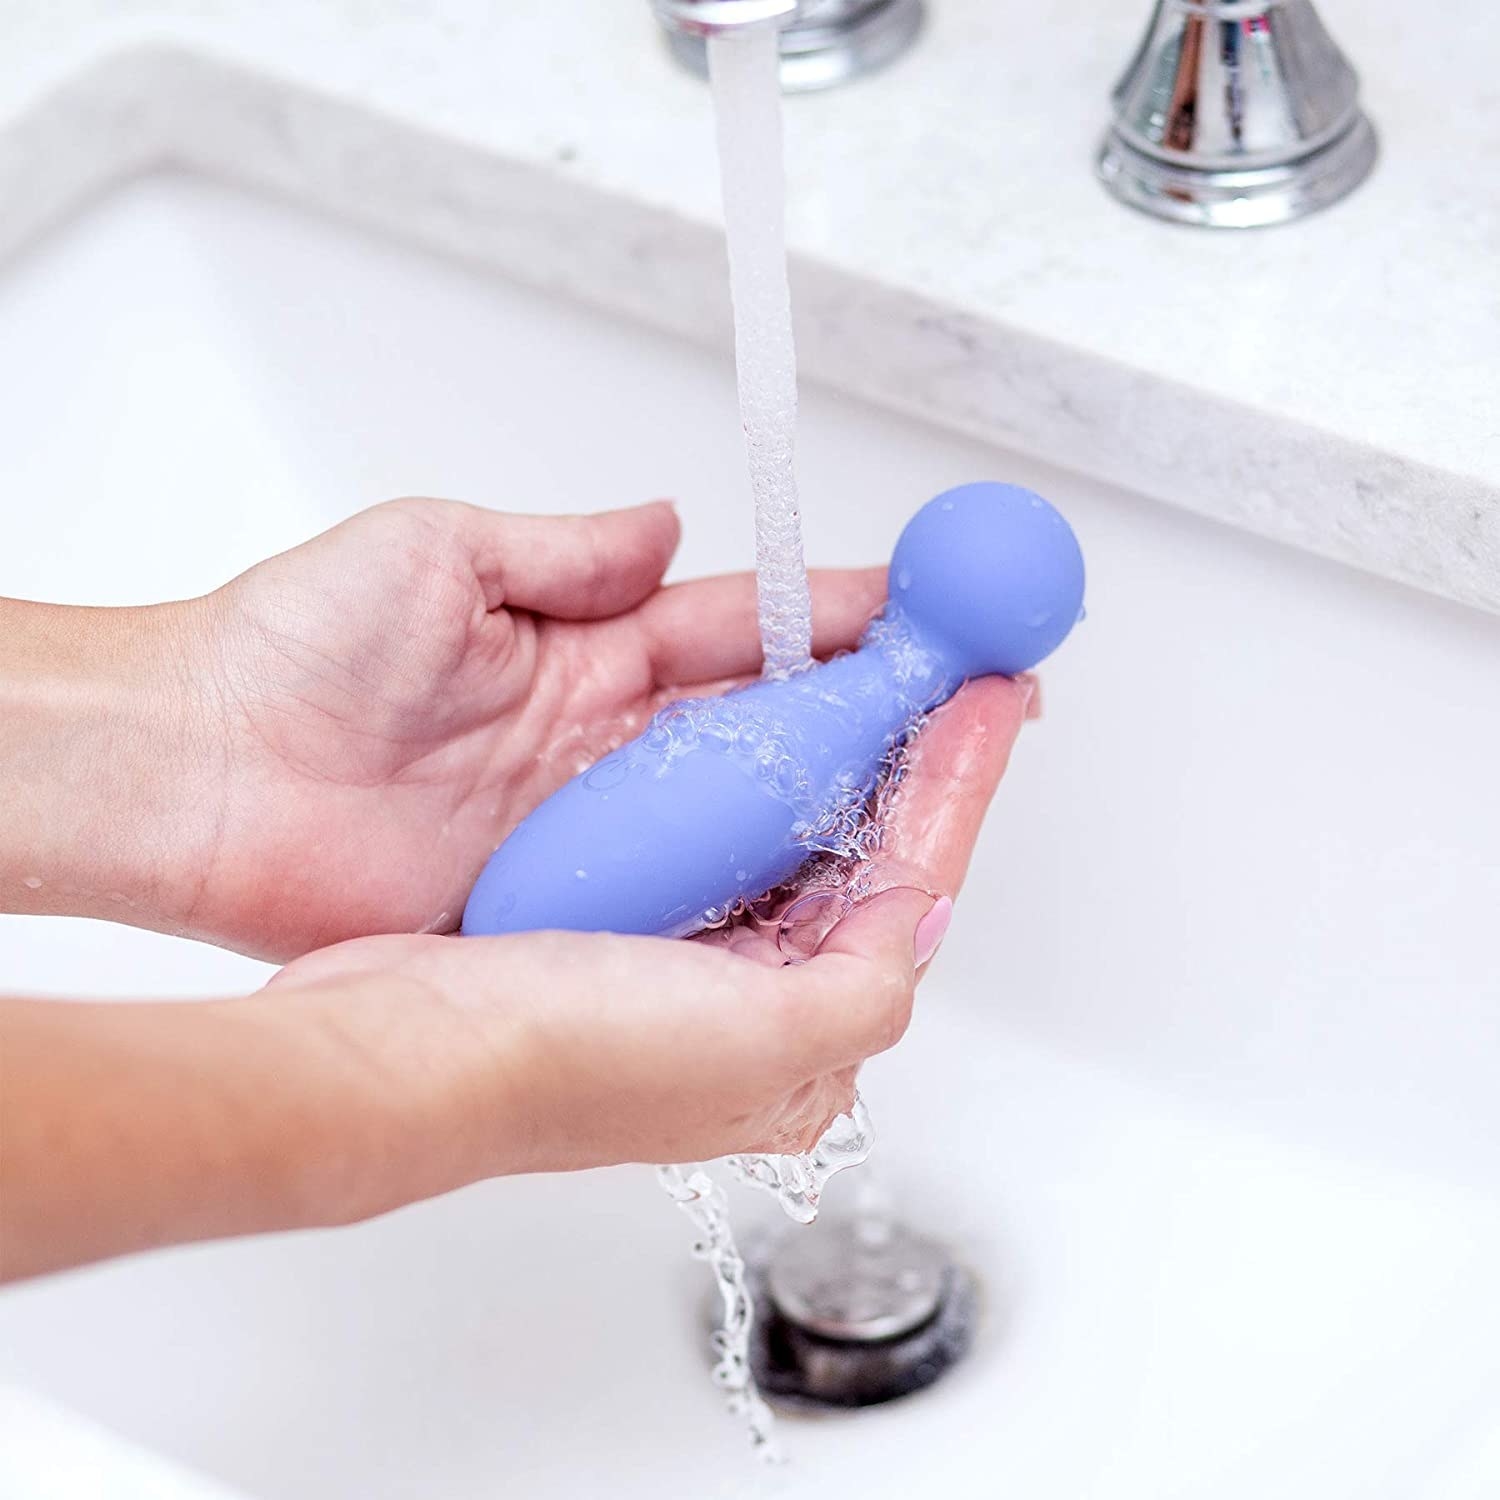 Hands holding periwinkle vibrator under running faucet